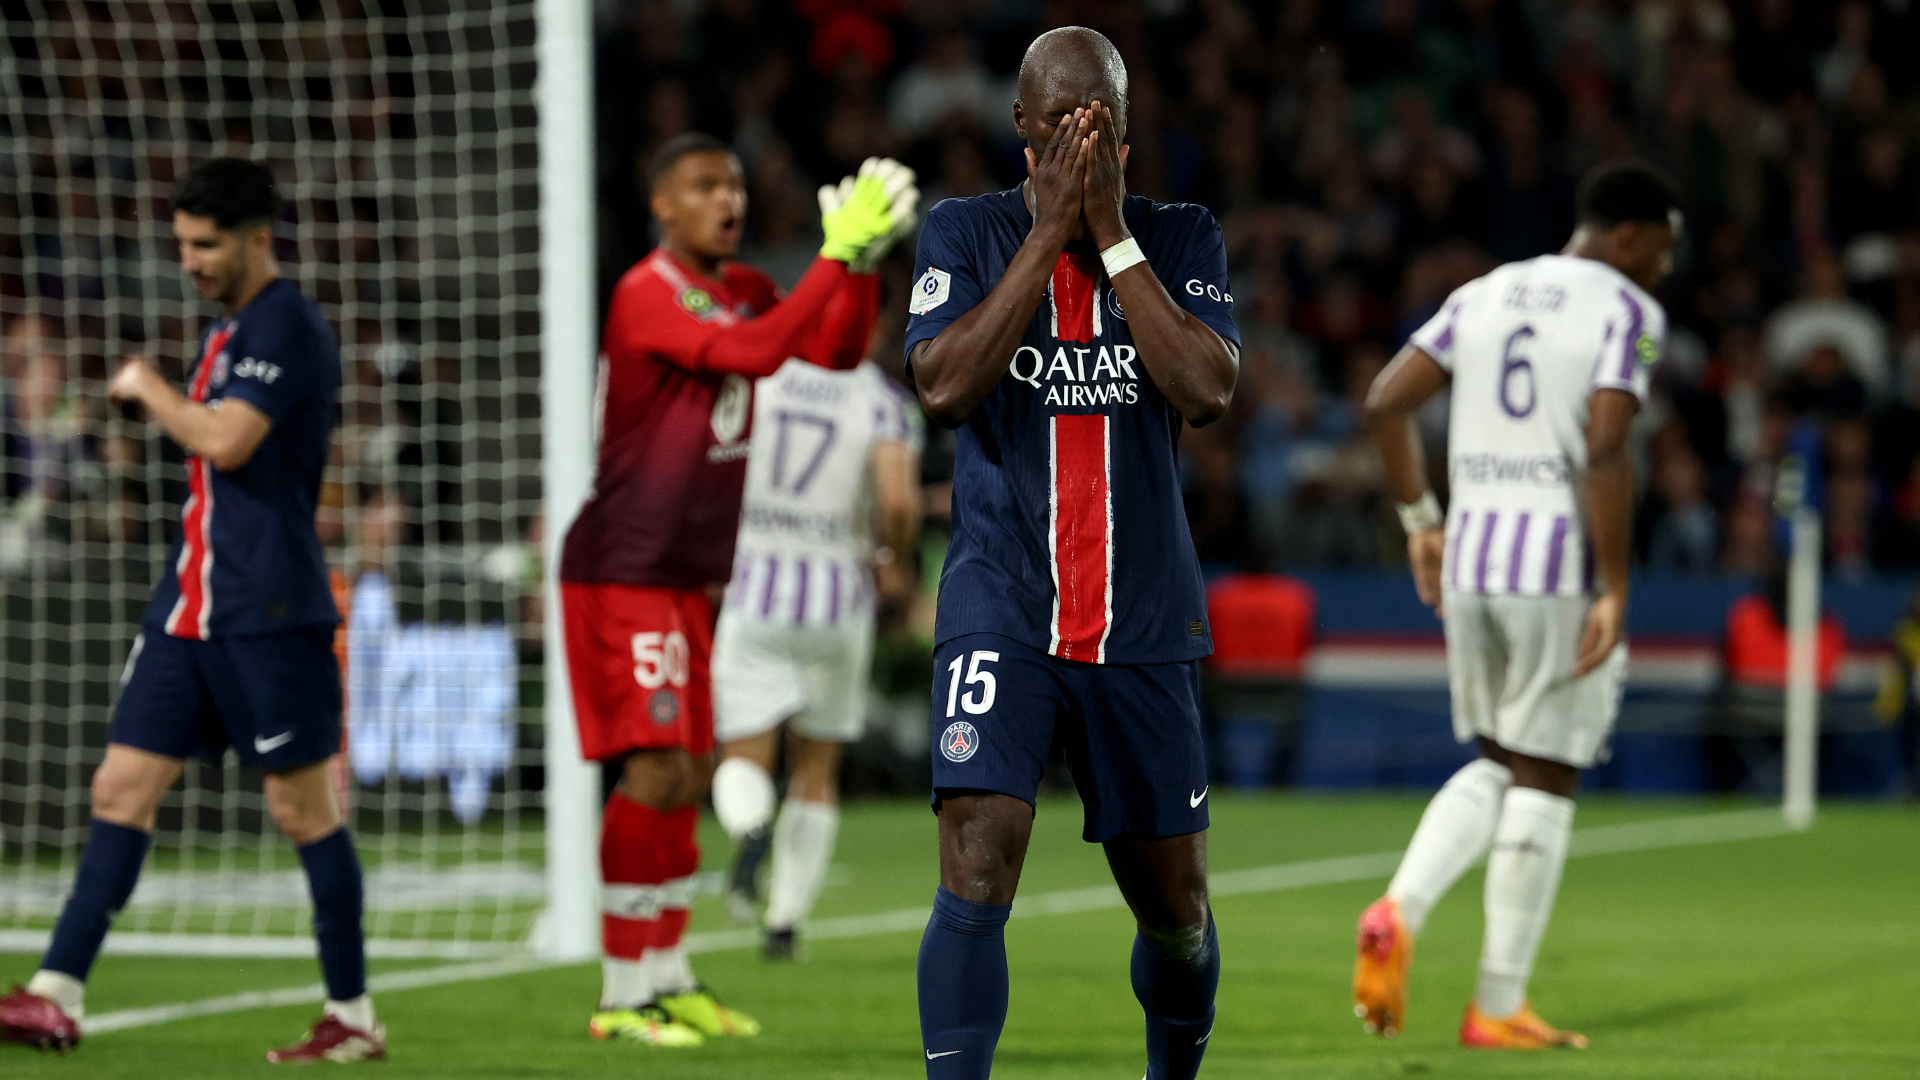 Report: PSG 1-3 Toulouse